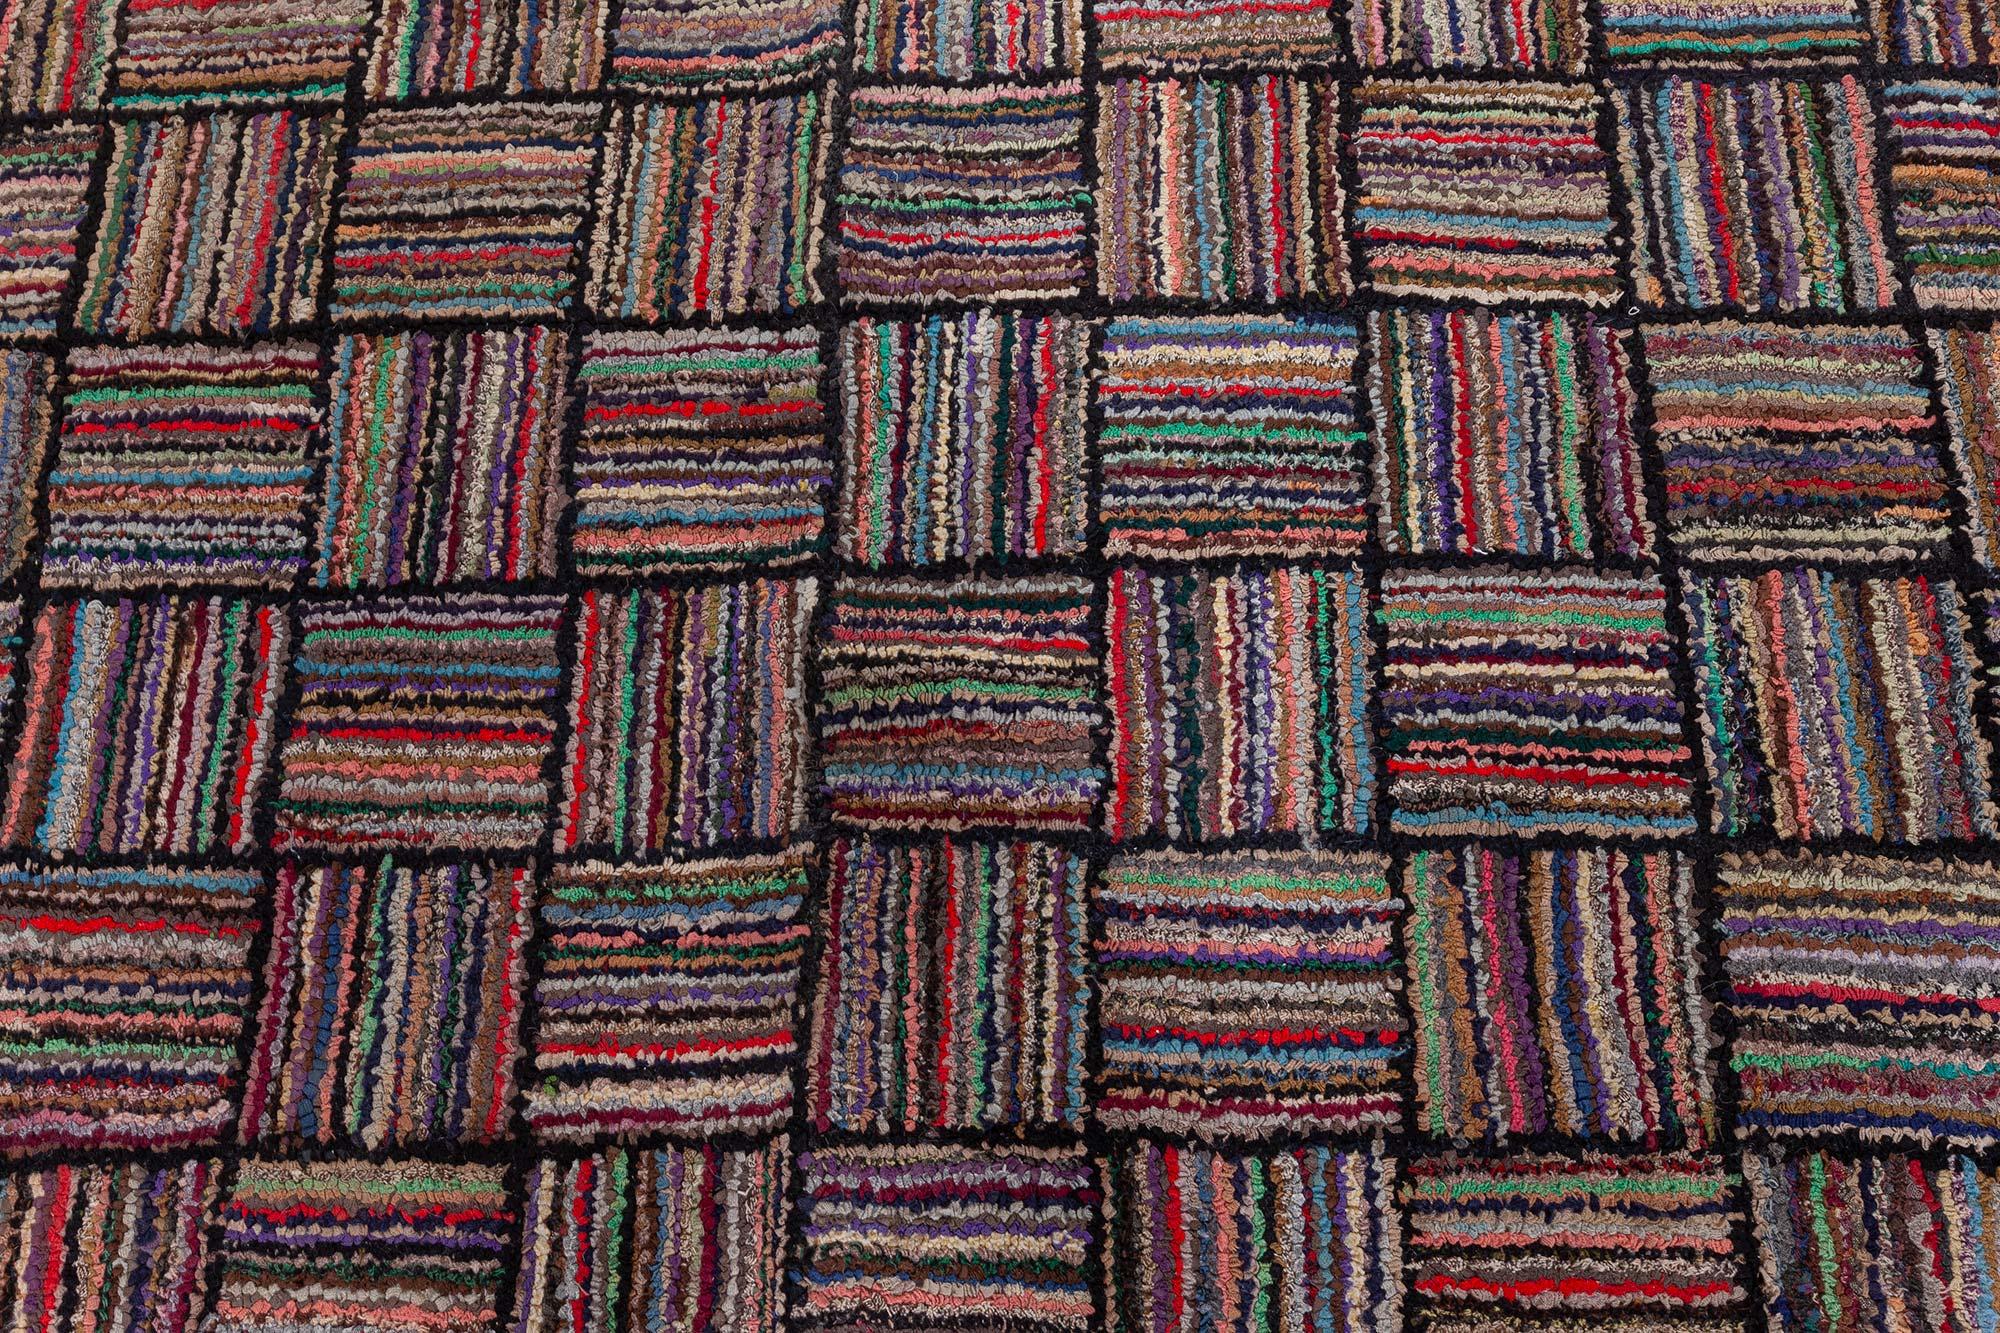 Mid-Century Modern Mid-20th century Striped American Hooked Tile Rug For Sale